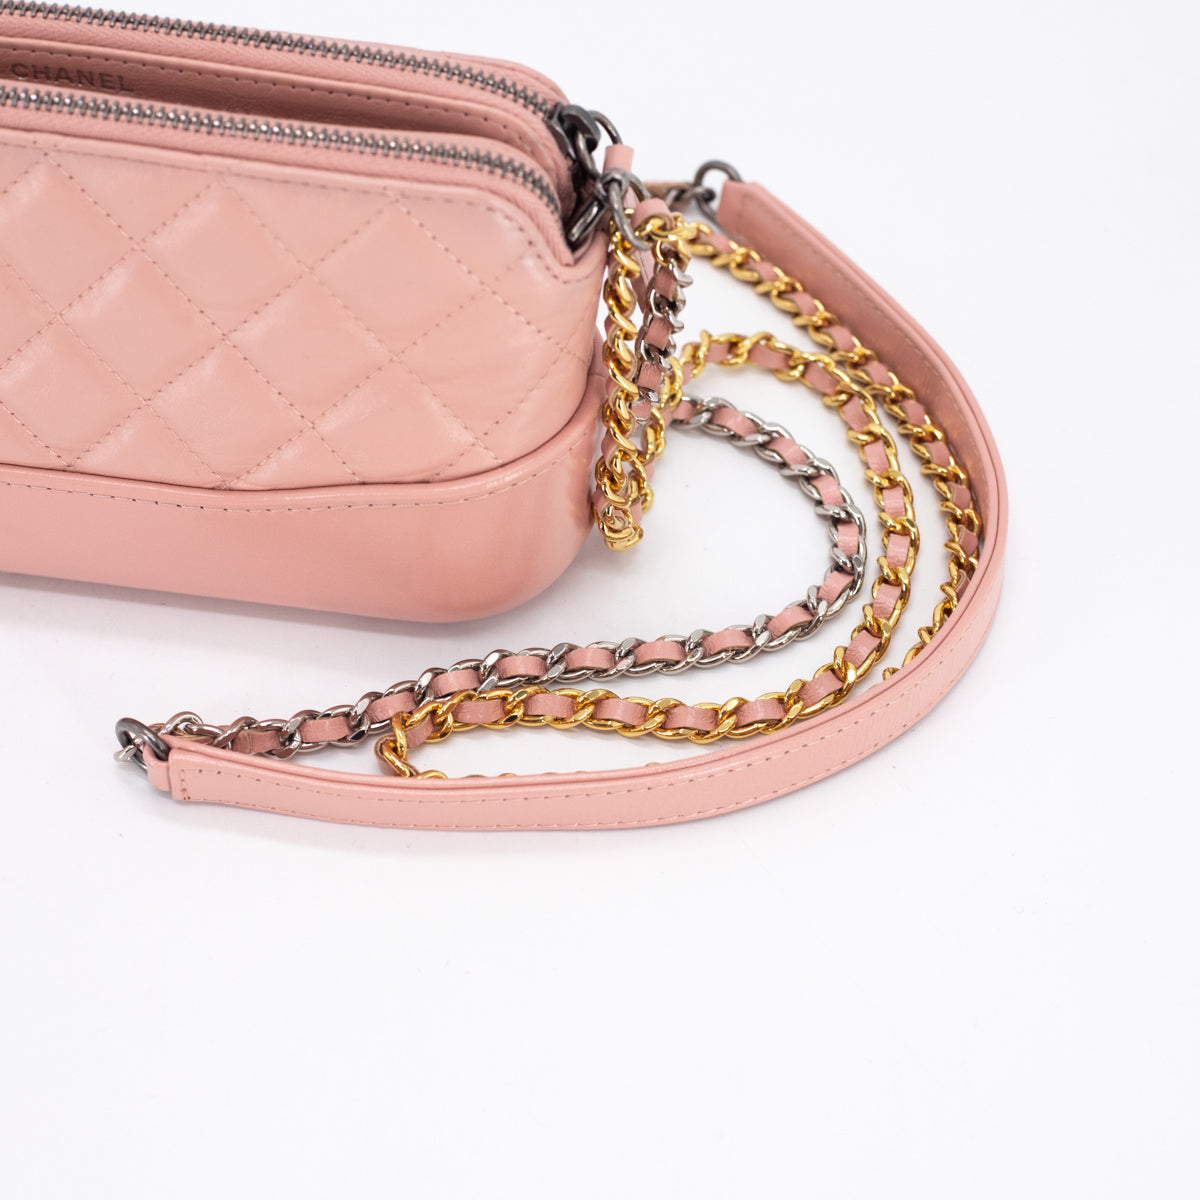 Chanel Quilted Calfskin Gabrielle Clutch On Chain Light Pink - THE